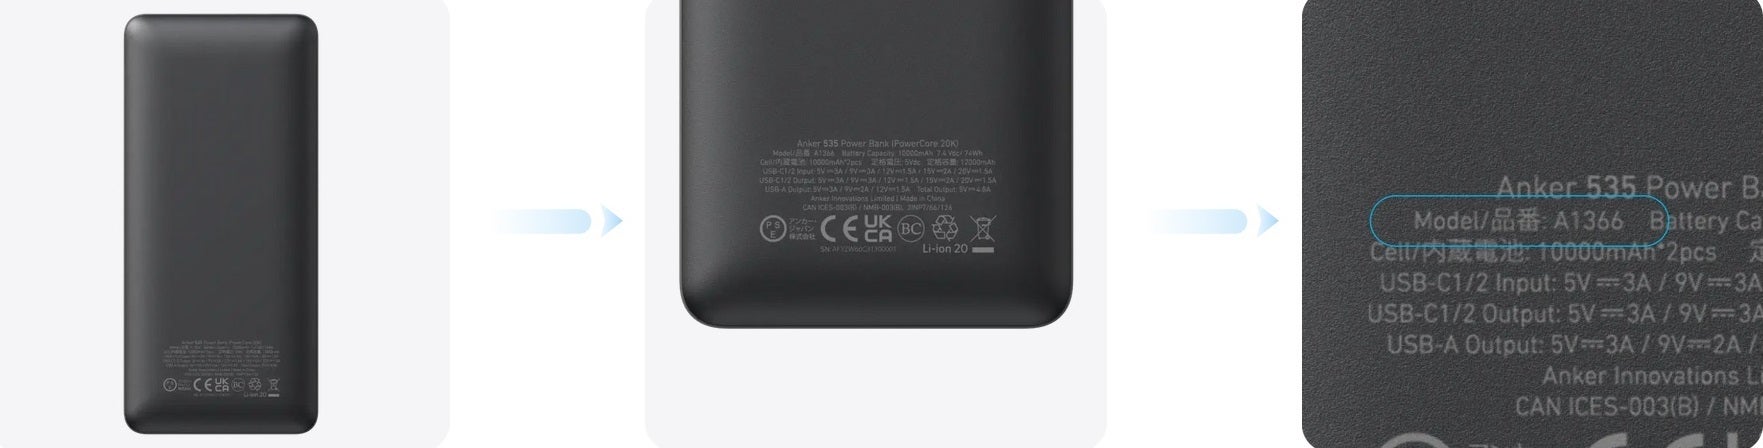 If you own this Anker power bank, follow the directions below to dispose of it safely - If you own this power bank, it needs to be safely disposed of immediately